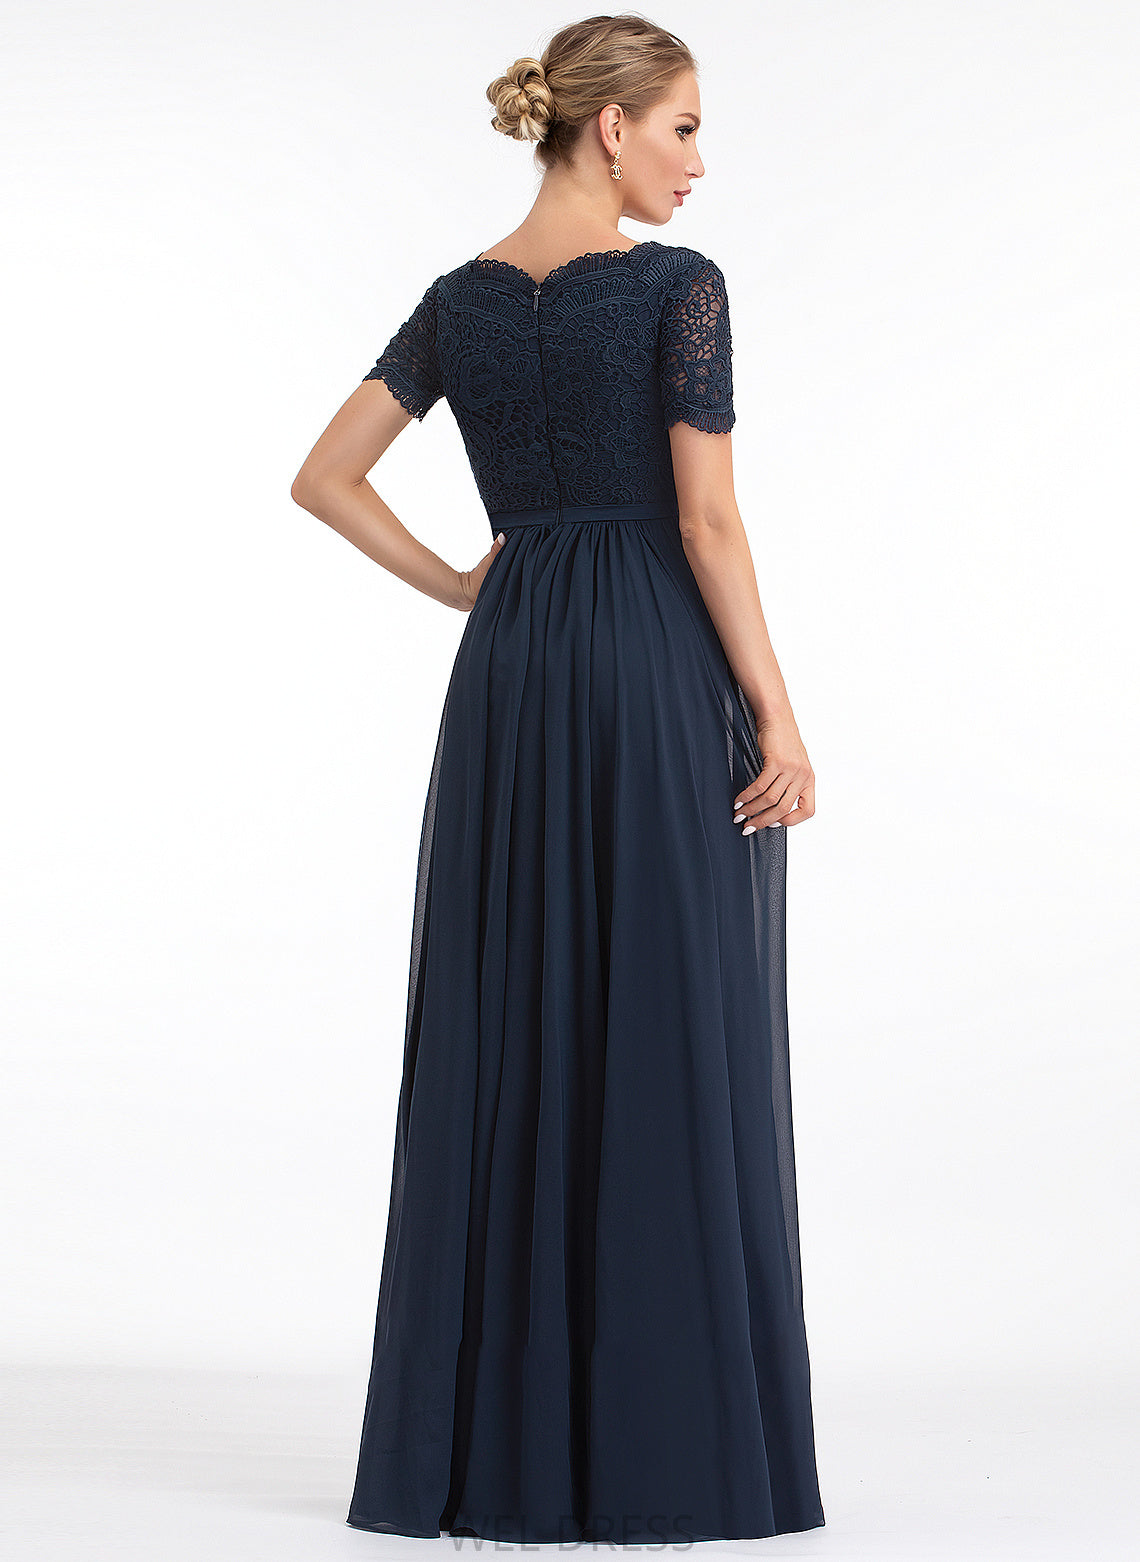 V-neck Fabric Neckline Lace Silhouette A-Line Floor-Length Length Sleeve Penelope Scoop High Low